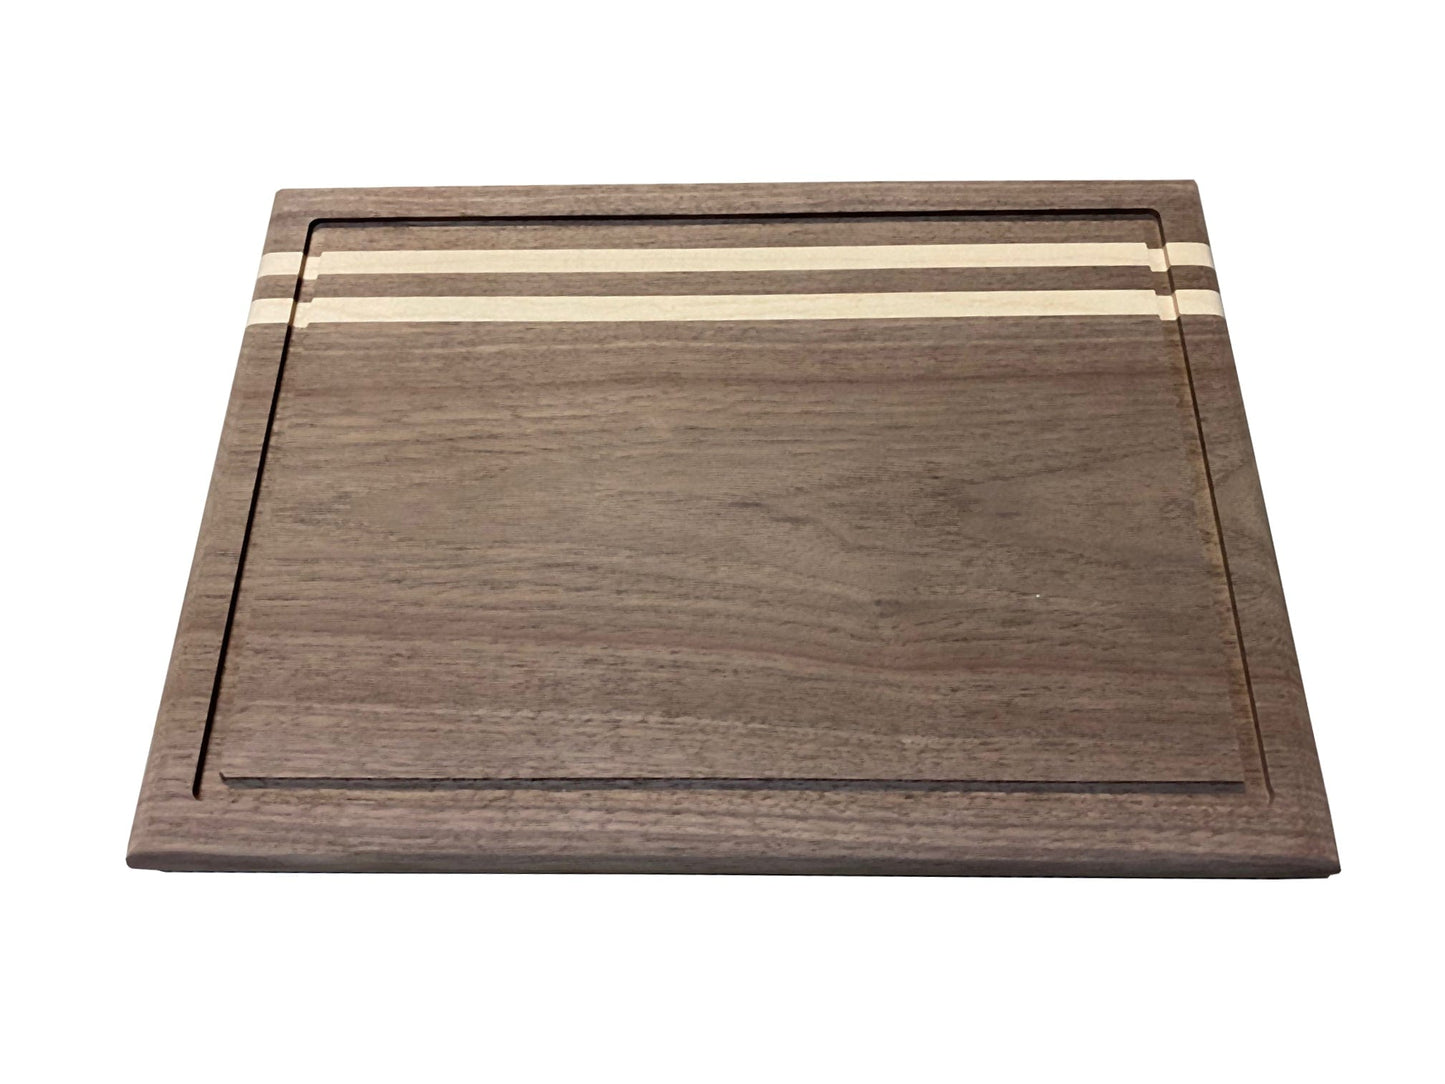 Best Redwood Cutting Boards Modern Walnut Mixed with 2 strips of Maple Side grain Cutting Board